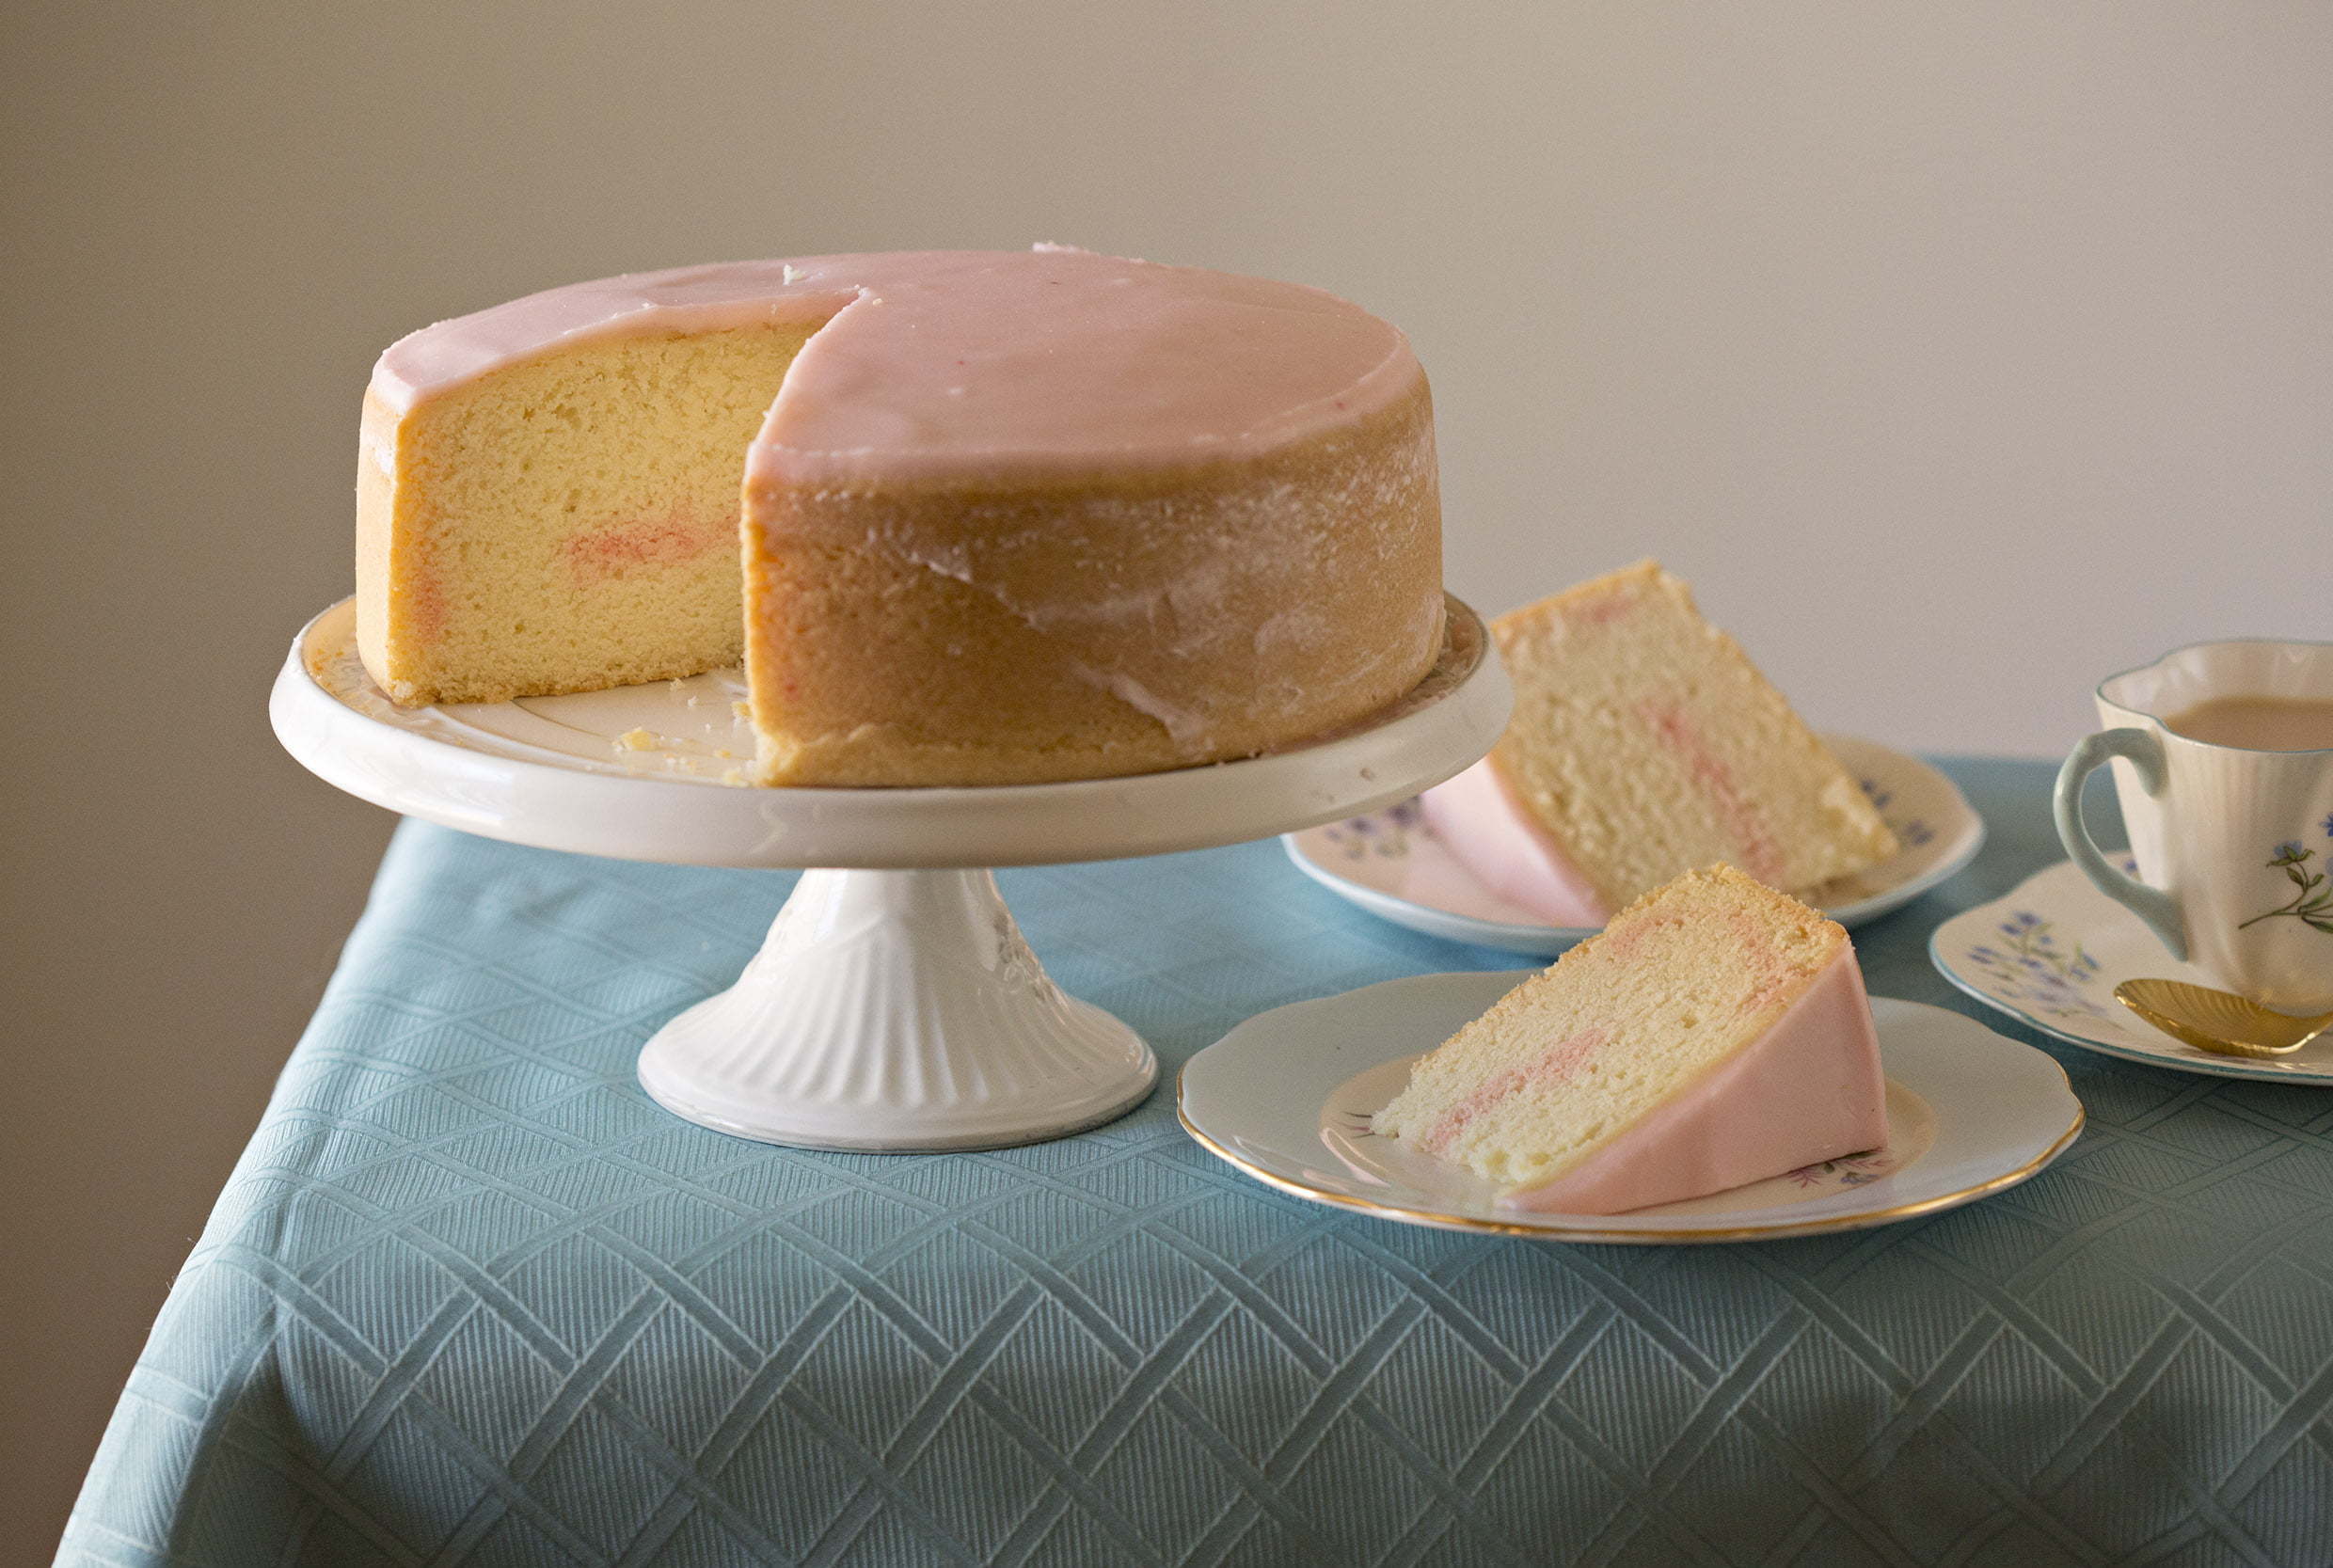 Free Recipe: Peach Blossom Cake by Merle Parrish from The Great Australian Cookbook